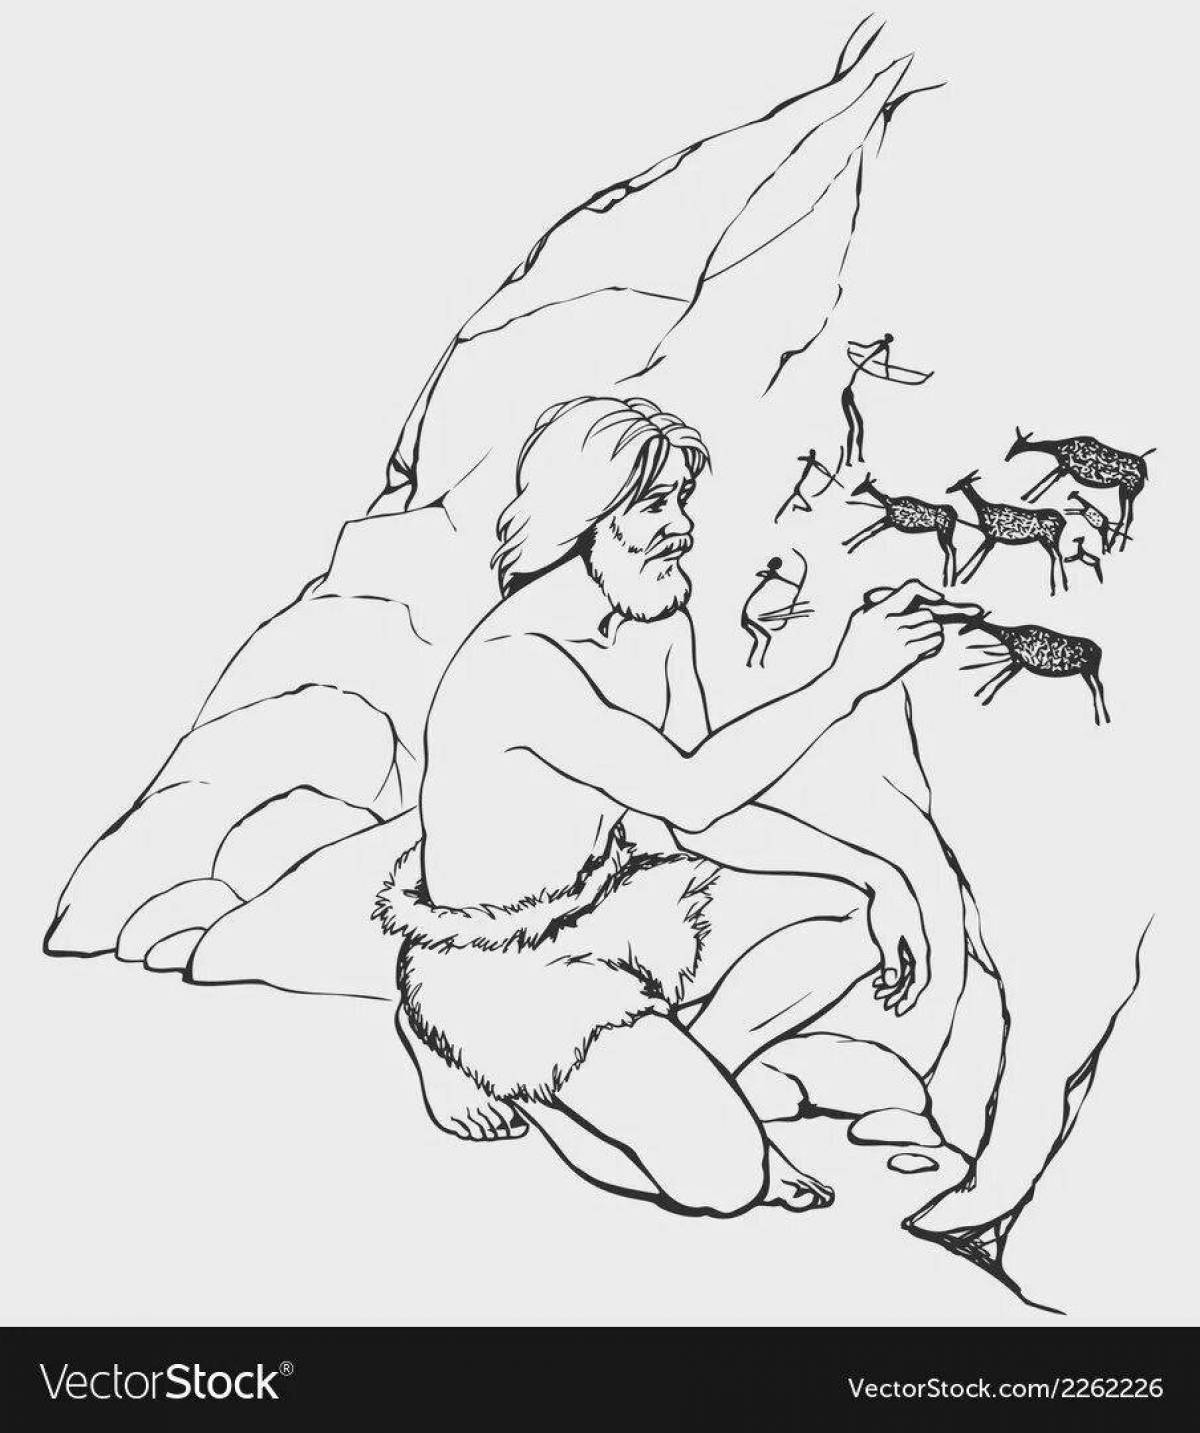 Stone age mystical coloring book